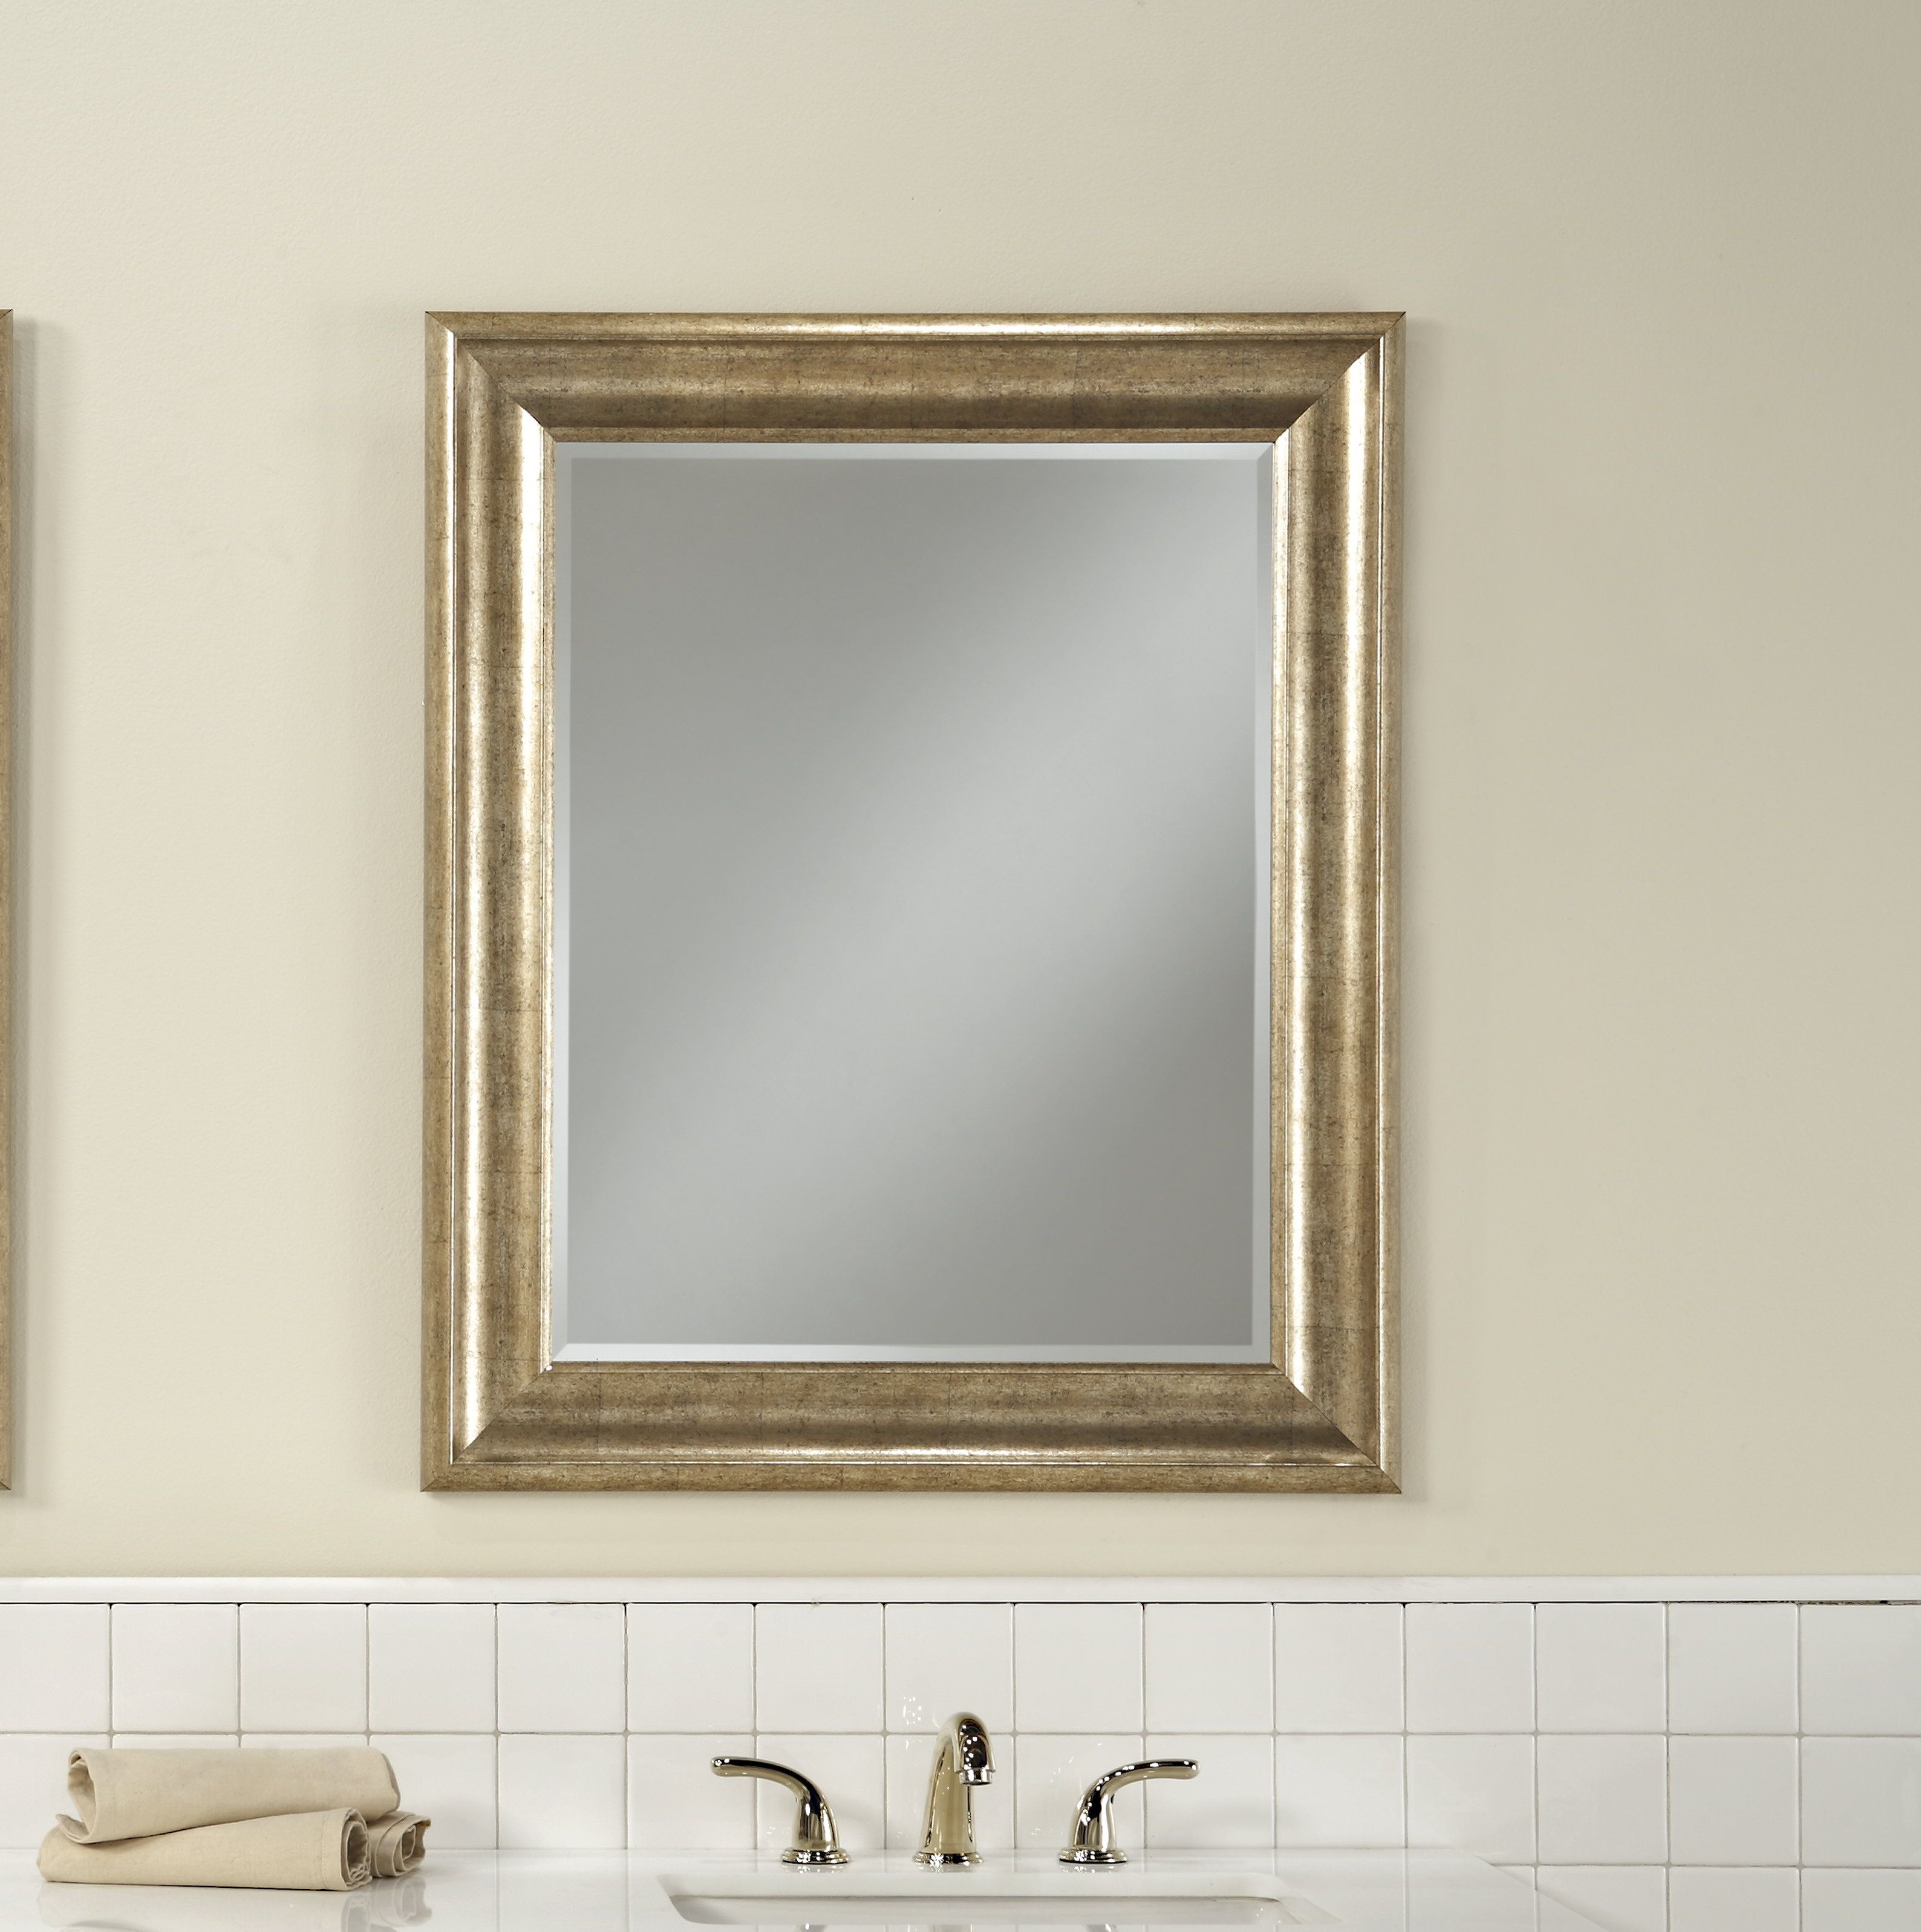 Northcutt Accent Mirror With Regard To Longwood Rustic Beveled Accent Mirrors (View 16 of 30)